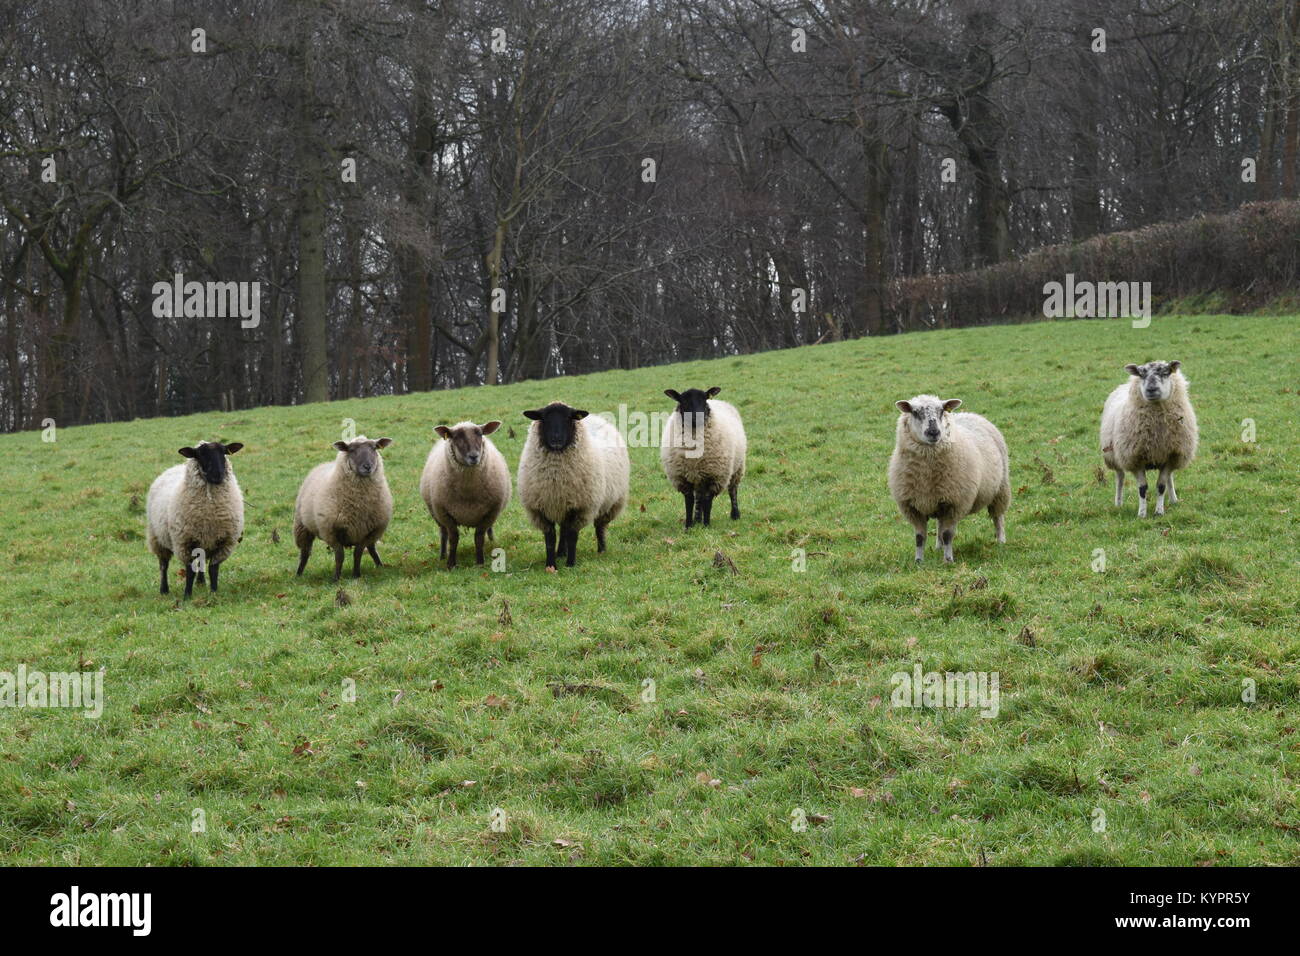 Seven sheep standing in a field of grass with a woodland backdrop. Stock Photo